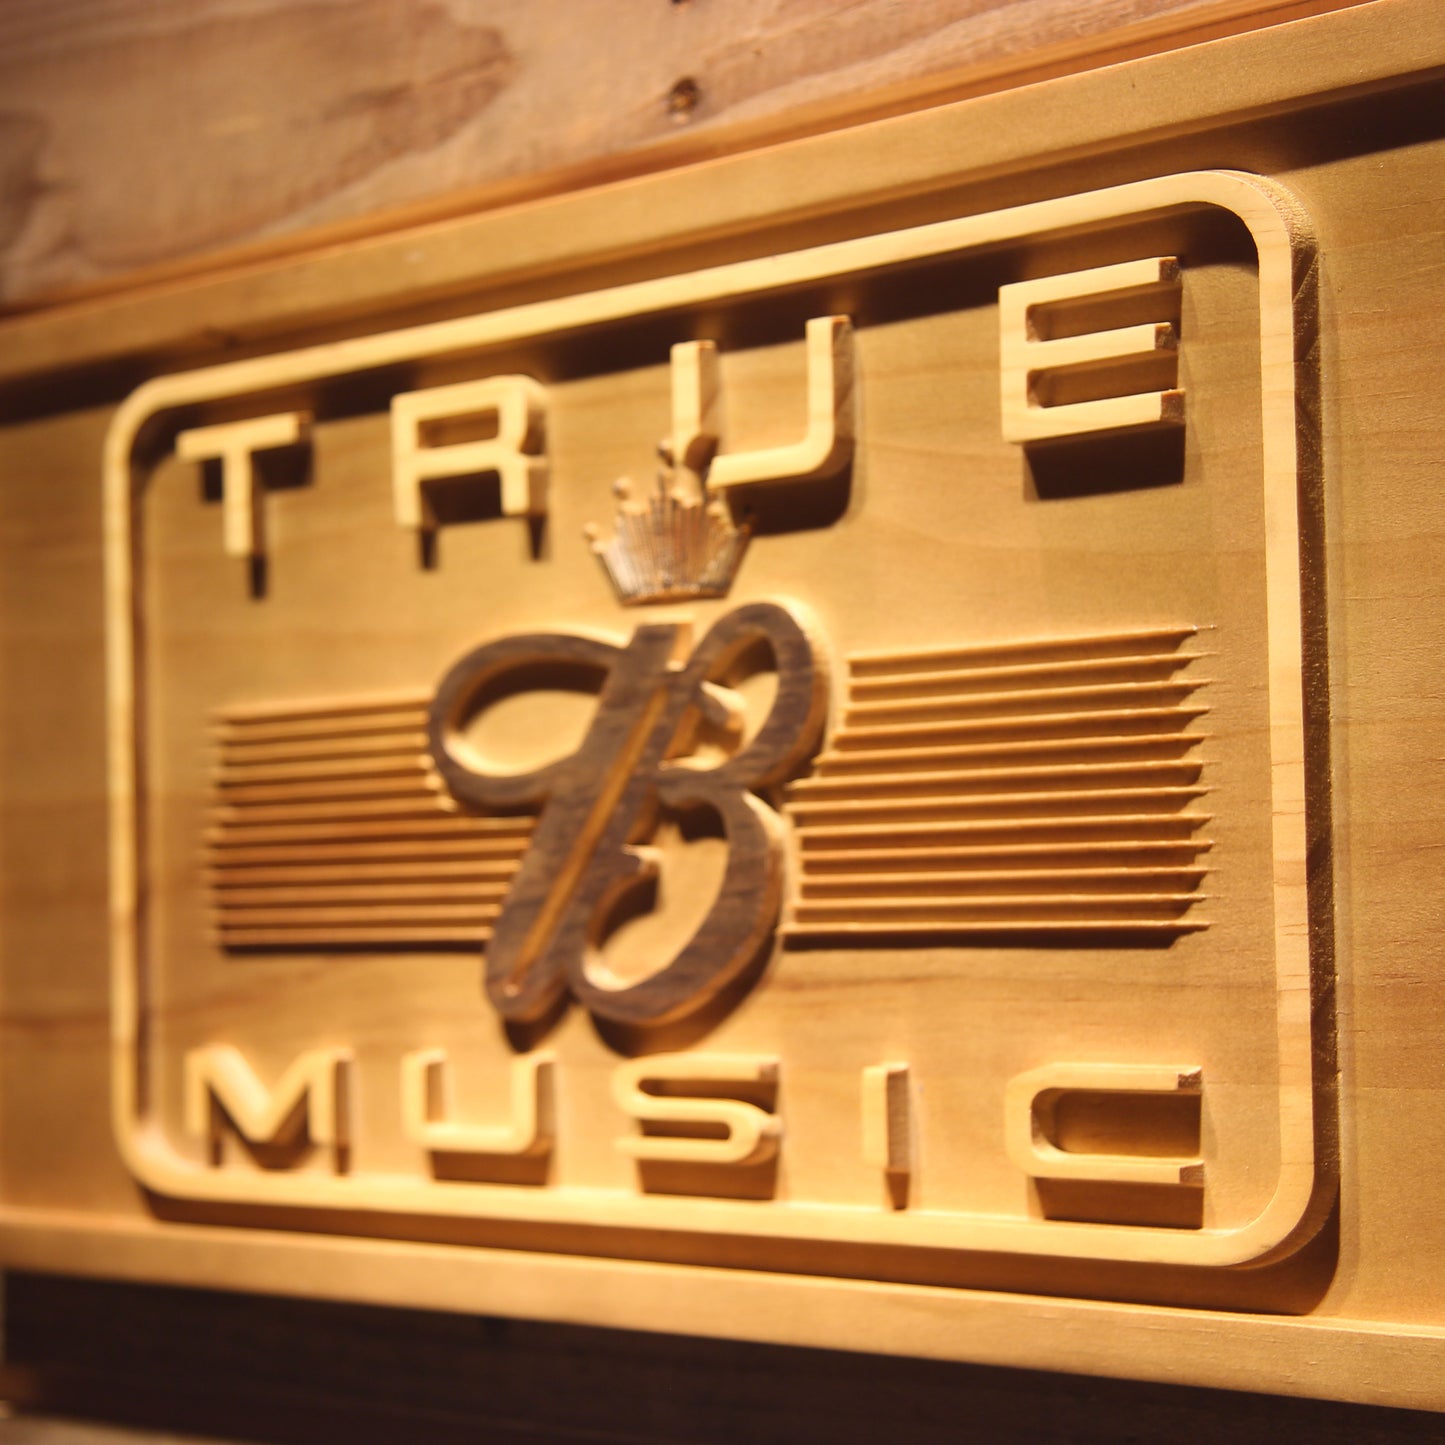 Budweiser True Music  3D Wooden Bar Signs by Woody Signs Co. - Handmade Crafted Unique Wooden Creative